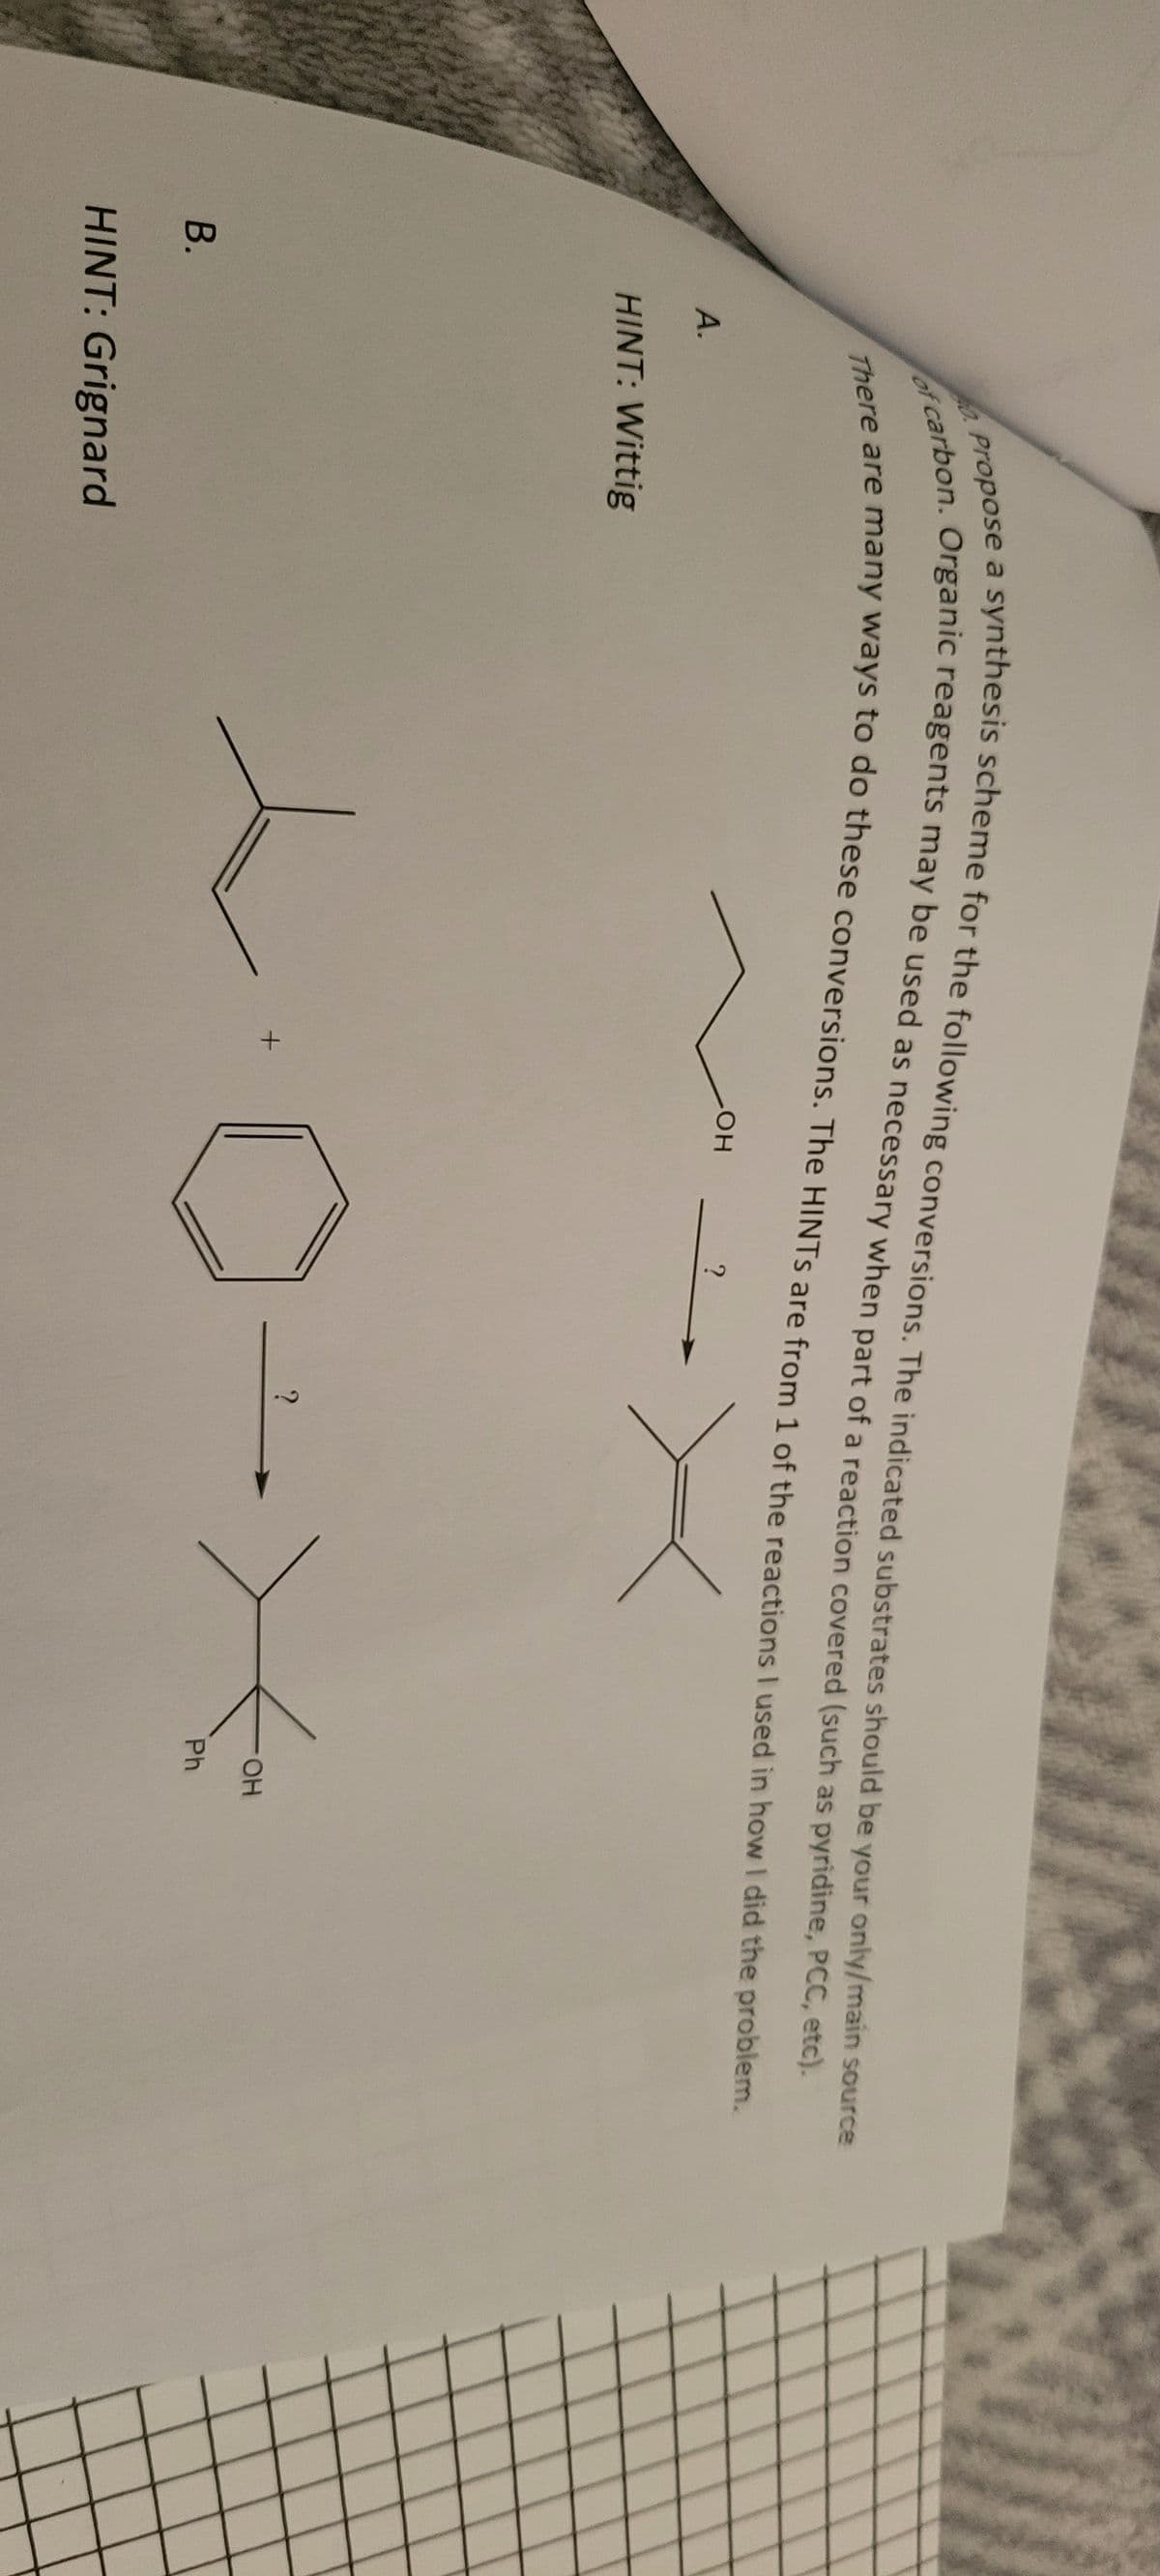 B.
A.
propose a synthesis scheme for the following conversions. The indicated substrates should be your only/main source
of carbon. Organic reagents may be used as necessary when part of a reaction covered (such as pyridine, PCC, etc).
There are many ways to do these conversions. The HINTS are from 1 of the reactions I used in how I did the problem.
X
40.
HINT: Wittig
HINT: Grignard
+
LOH
?
?
OH
Ph